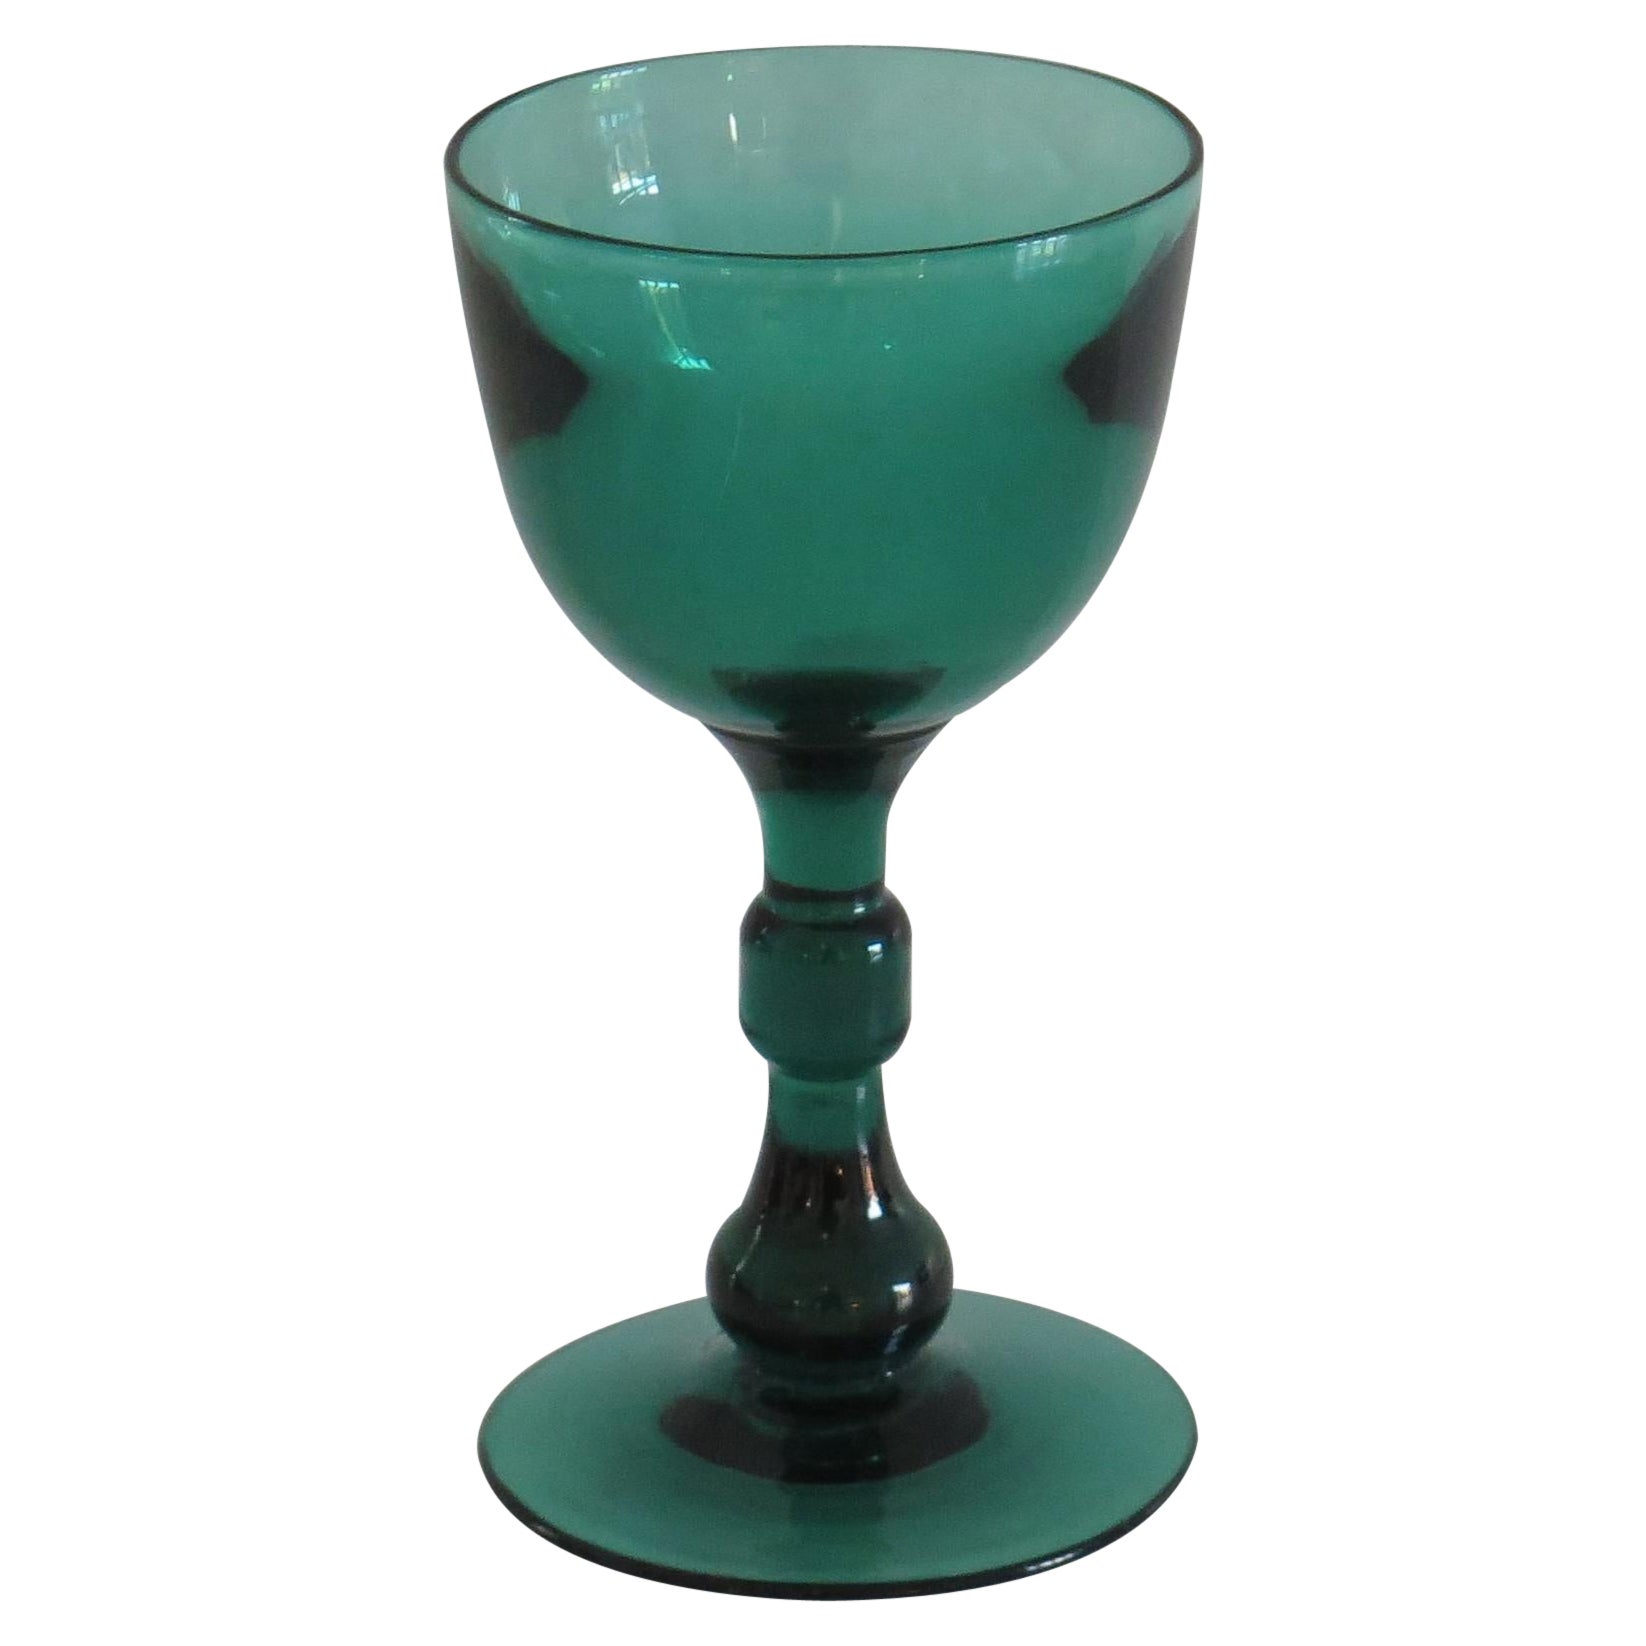 1910 Bristol Blue Small Wine Glass Antique English Port Sherry Double Knop Foot 